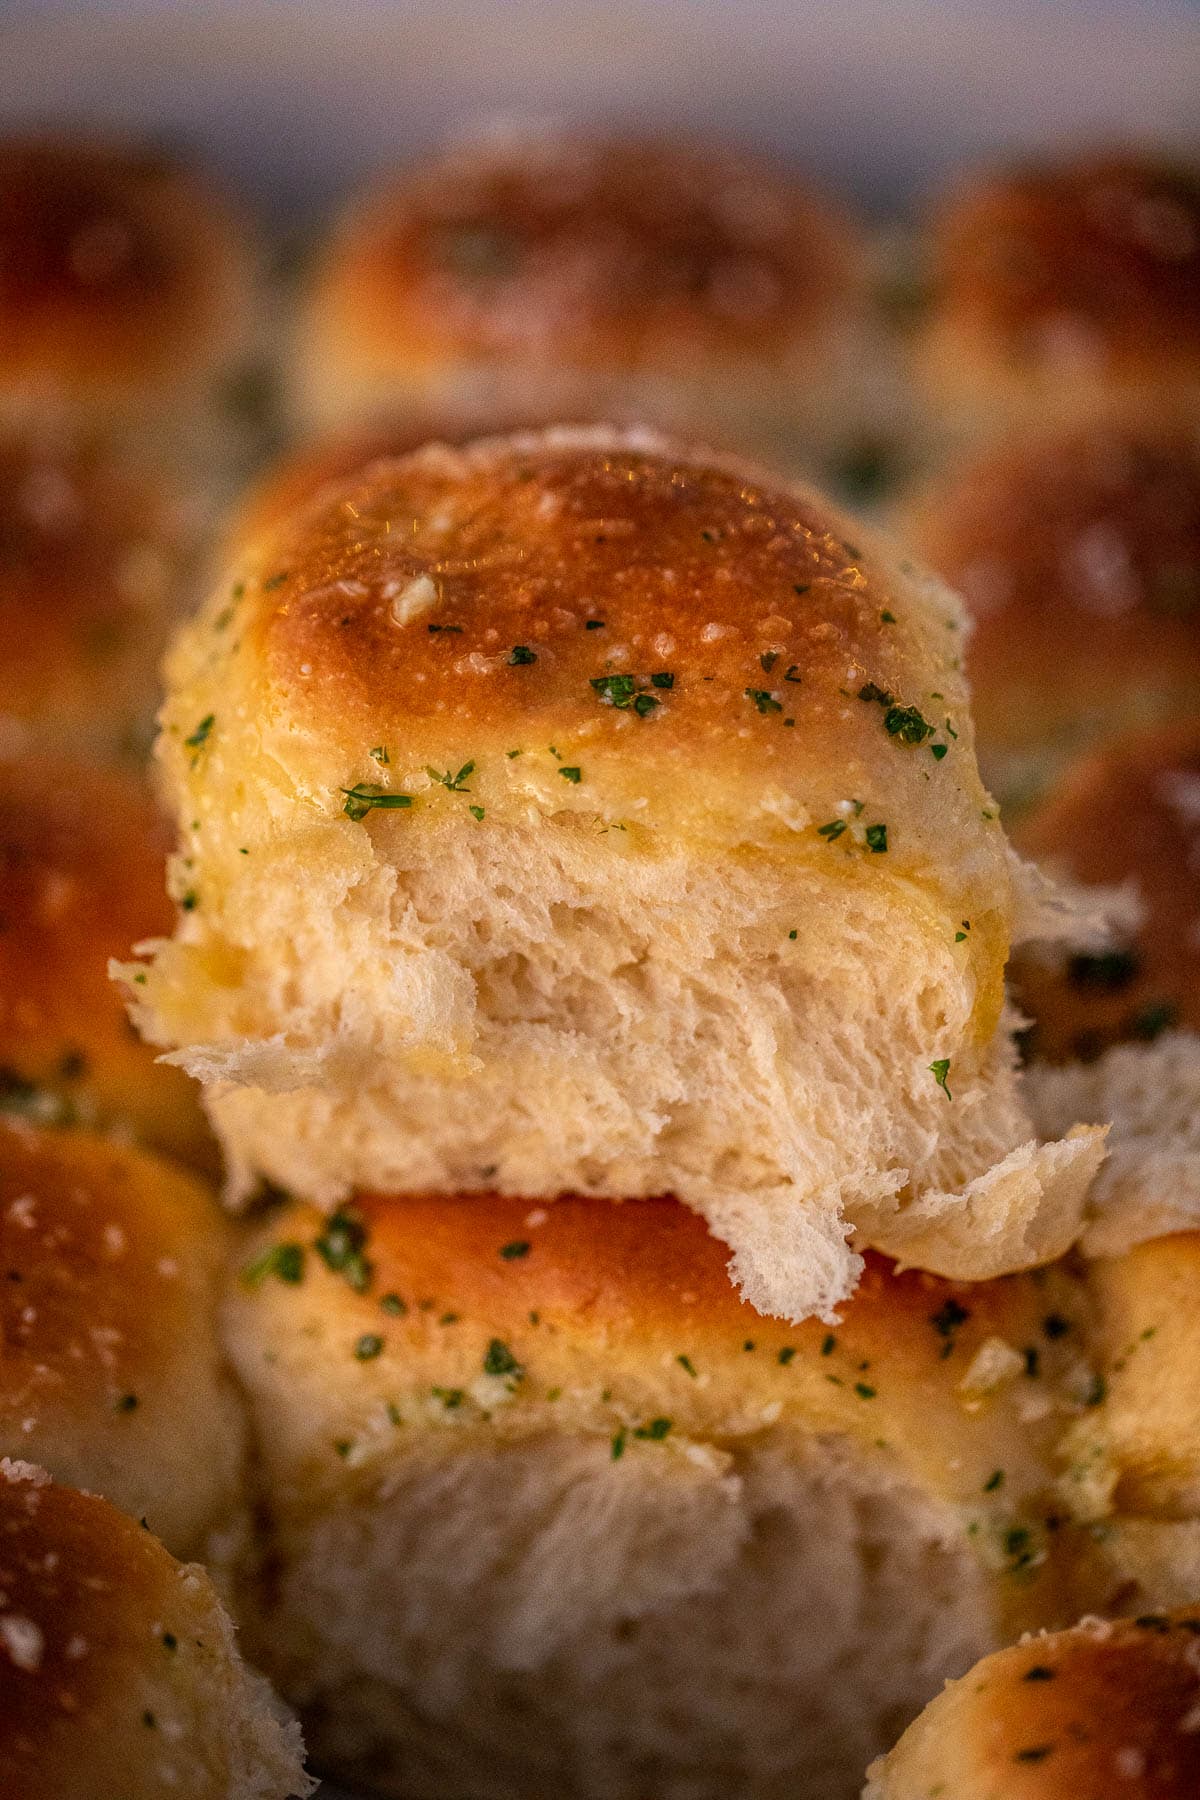 A dinner roll showing soft texture